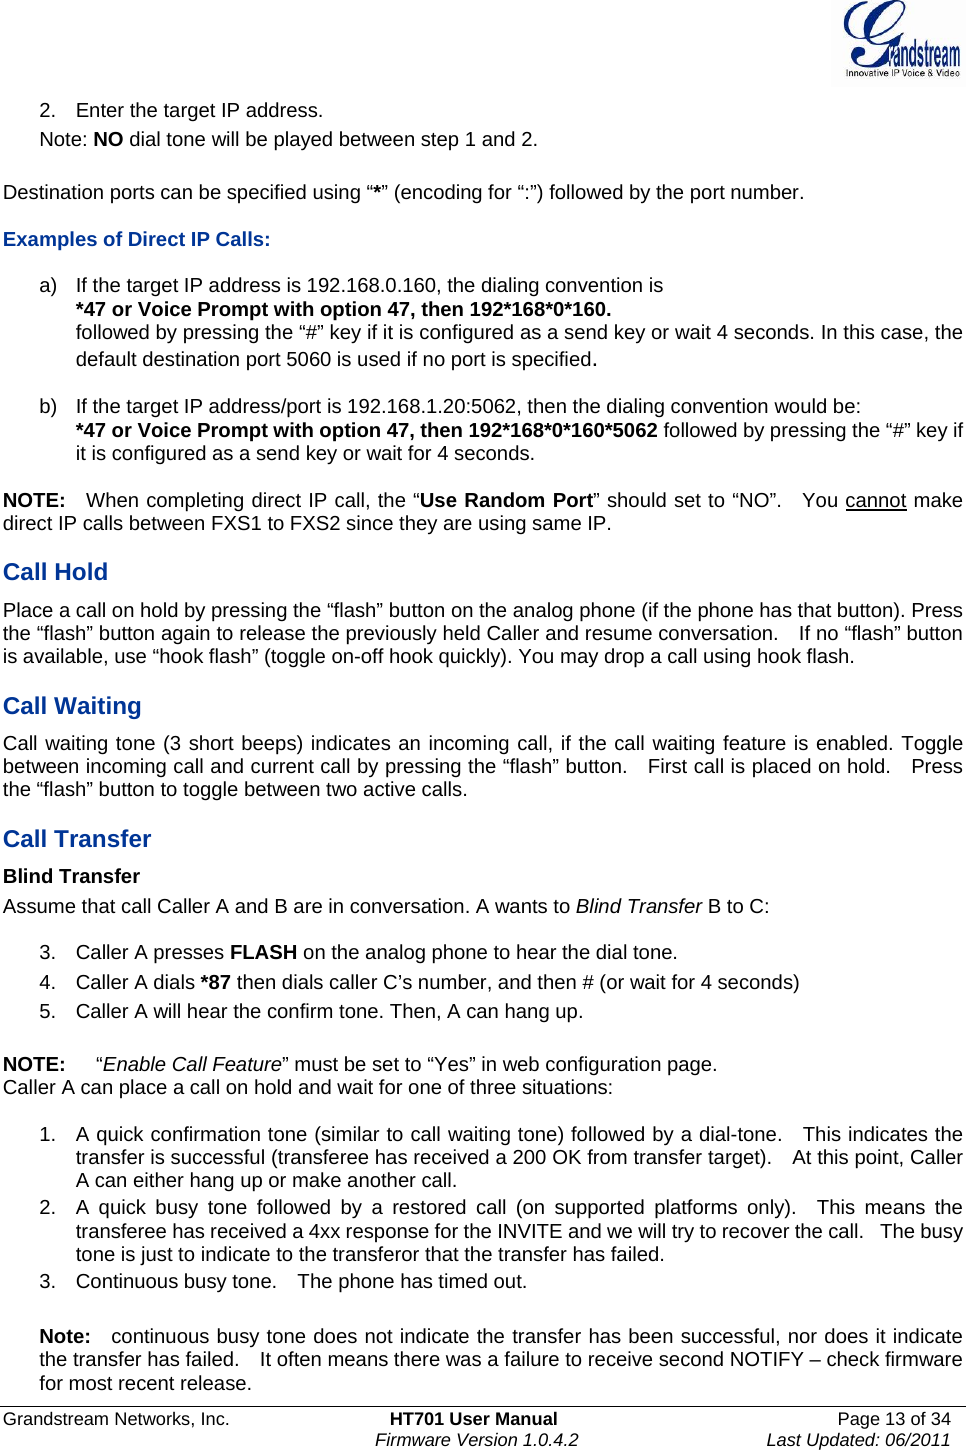  Grandstream Networks, Inc.  HT701 User Manual  Page 13 of 34     Firmware Version 1.0.4.2  Last Updated: 06/2011  2.  Enter the target IP address. Note: NO dial tone will be played between step 1 and 2.  Destination ports can be specified using “*” (encoding for “:”) followed by the port number.      Examples of Direct IP Calls:    a)  If the target IP address is 192.168.0.160, the dialing convention is *47 or Voice Prompt with option 47, then 192*168*0*160.   followed by pressing the “#” key if it is configured as a send key or wait 4 seconds. In this case, the default destination port 5060 is used if no port is specified.   b)  If the target IP address/port is 192.168.1.20:5062, then the dialing convention would be: *47 or Voice Prompt with option 47, then 192*168*0*160*5062 followed by pressing the “#” key if it is configured as a send key or wait for 4 seconds.  NOTE:  When completing direct IP call, the “Use Random Port” should set to “NO”.   You cannot make direct IP calls between FXS1 to FXS2 since they are using same IP.  Call Hold Place a call on hold by pressing the “flash” button on the analog phone (if the phone has that button). Press the “flash” button again to release the previously held Caller and resume conversation.    If no “flash” button is available, use “hook flash” (toggle on-off hook quickly). You may drop a call using hook flash.      Call Waiting Call waiting tone (3 short beeps) indicates an incoming call, if the call waiting feature is enabled. Toggle between incoming call and current call by pressing the “flash” button.    First call is placed on hold.    Press the “flash” button to toggle between two active calls.    Call Transfer Blind Transfer Assume that call Caller A and B are in conversation. A wants to Blind Transfer B to C:  3. Caller A presses FLASH on the analog phone to hear the dial tone. 4. Caller A dials *87 then dials caller C’s number, and then # (or wait for 4 seconds) 5.  Caller A will hear the confirm tone. Then, A can hang up.  NOTE:   “Enable Call Feature” must be set to “Yes” in web configuration page. Caller A can place a call on hold and wait for one of three situations:      1.  A quick confirmation tone (similar to call waiting tone) followed by a dial-tone.    This indicates the transfer is successful (transferee has received a 200 OK from transfer target).    At this point, Caller A can either hang up or make another call.   2.  A quick busy tone followed by a restored call (on supported platforms only).  This means the transferee has received a 4xx response for the INVITE and we will try to recover the call.   The busy tone is just to indicate to the transferor that the transfer has failed.   3.  Continuous busy tone.    The phone has timed out.    Note:   continuous busy tone does not indicate the transfer has been successful, nor does it indicate the transfer has failed.    It often means there was a failure to receive second NOTIFY – check firmware for most recent release.   